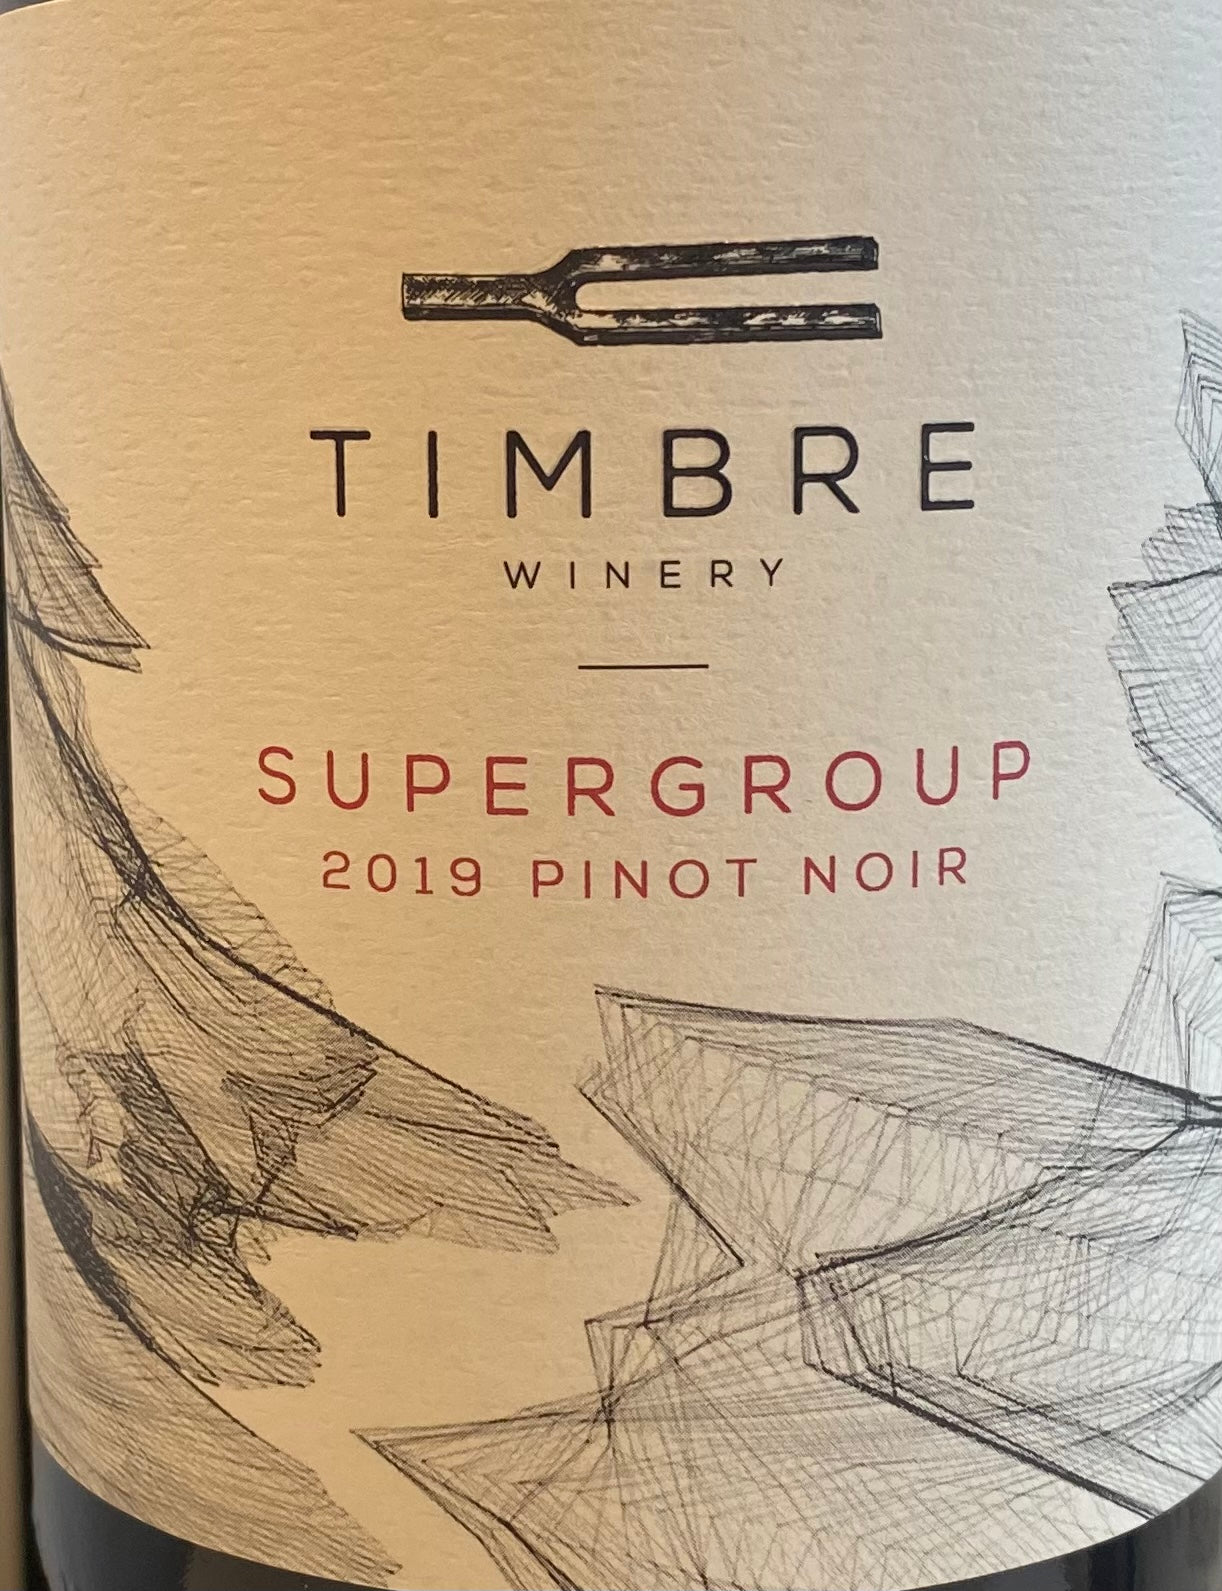 Timbre Winery 'Supergroup' - Pinot Noir